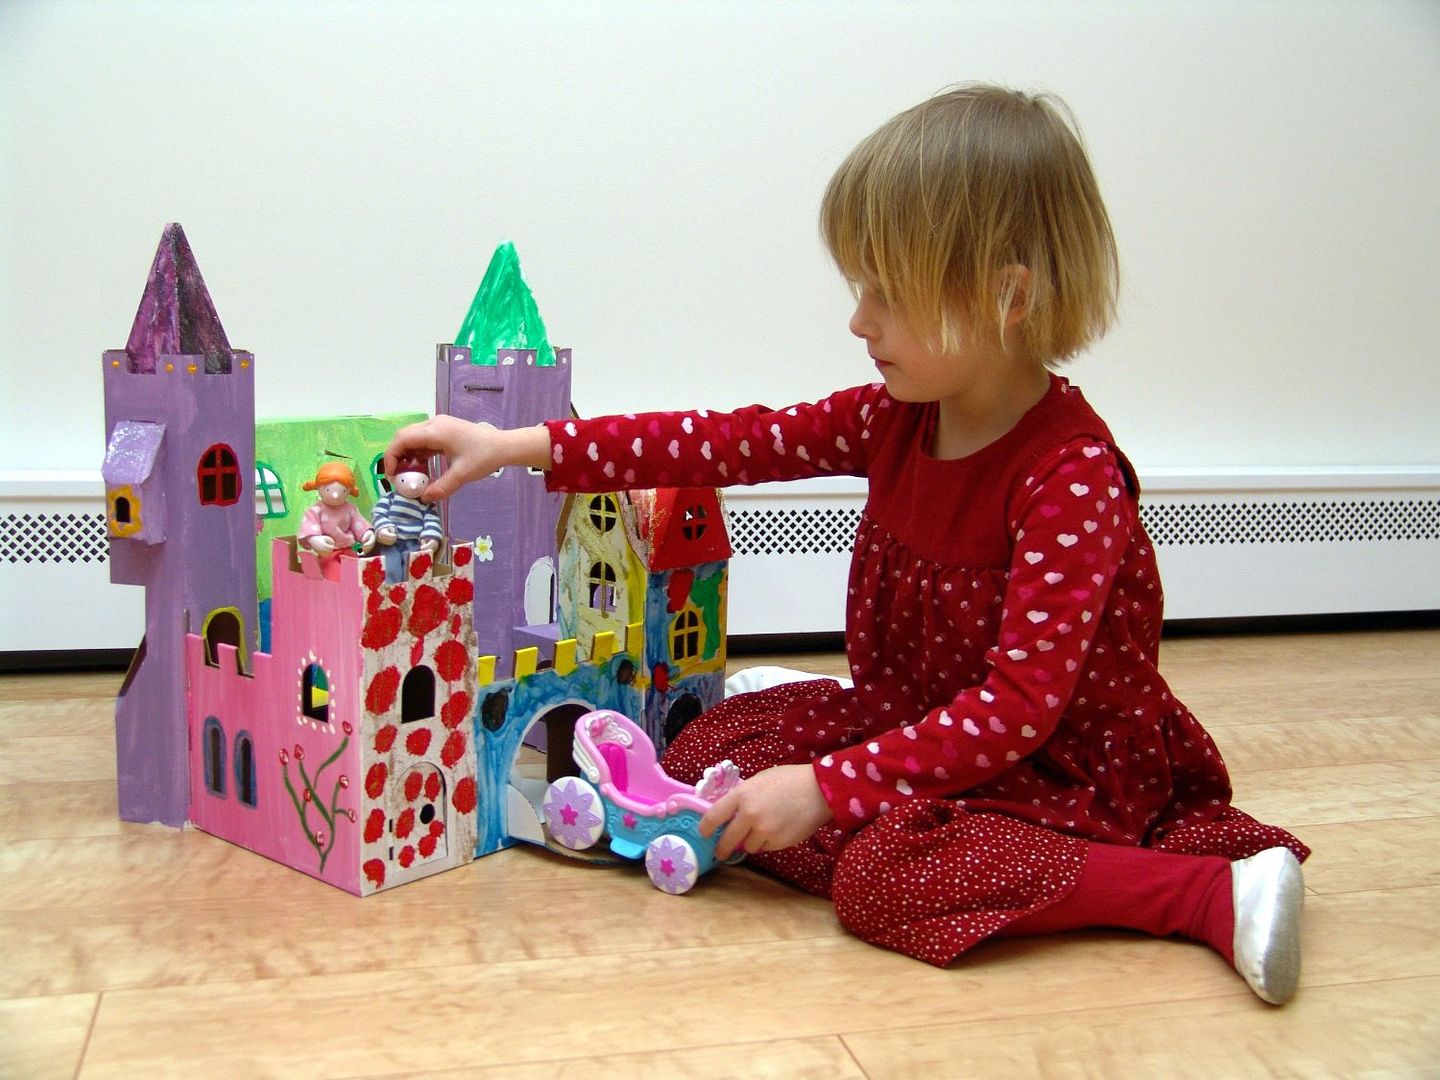 Best gifts for a 4 year old: Calafant palace